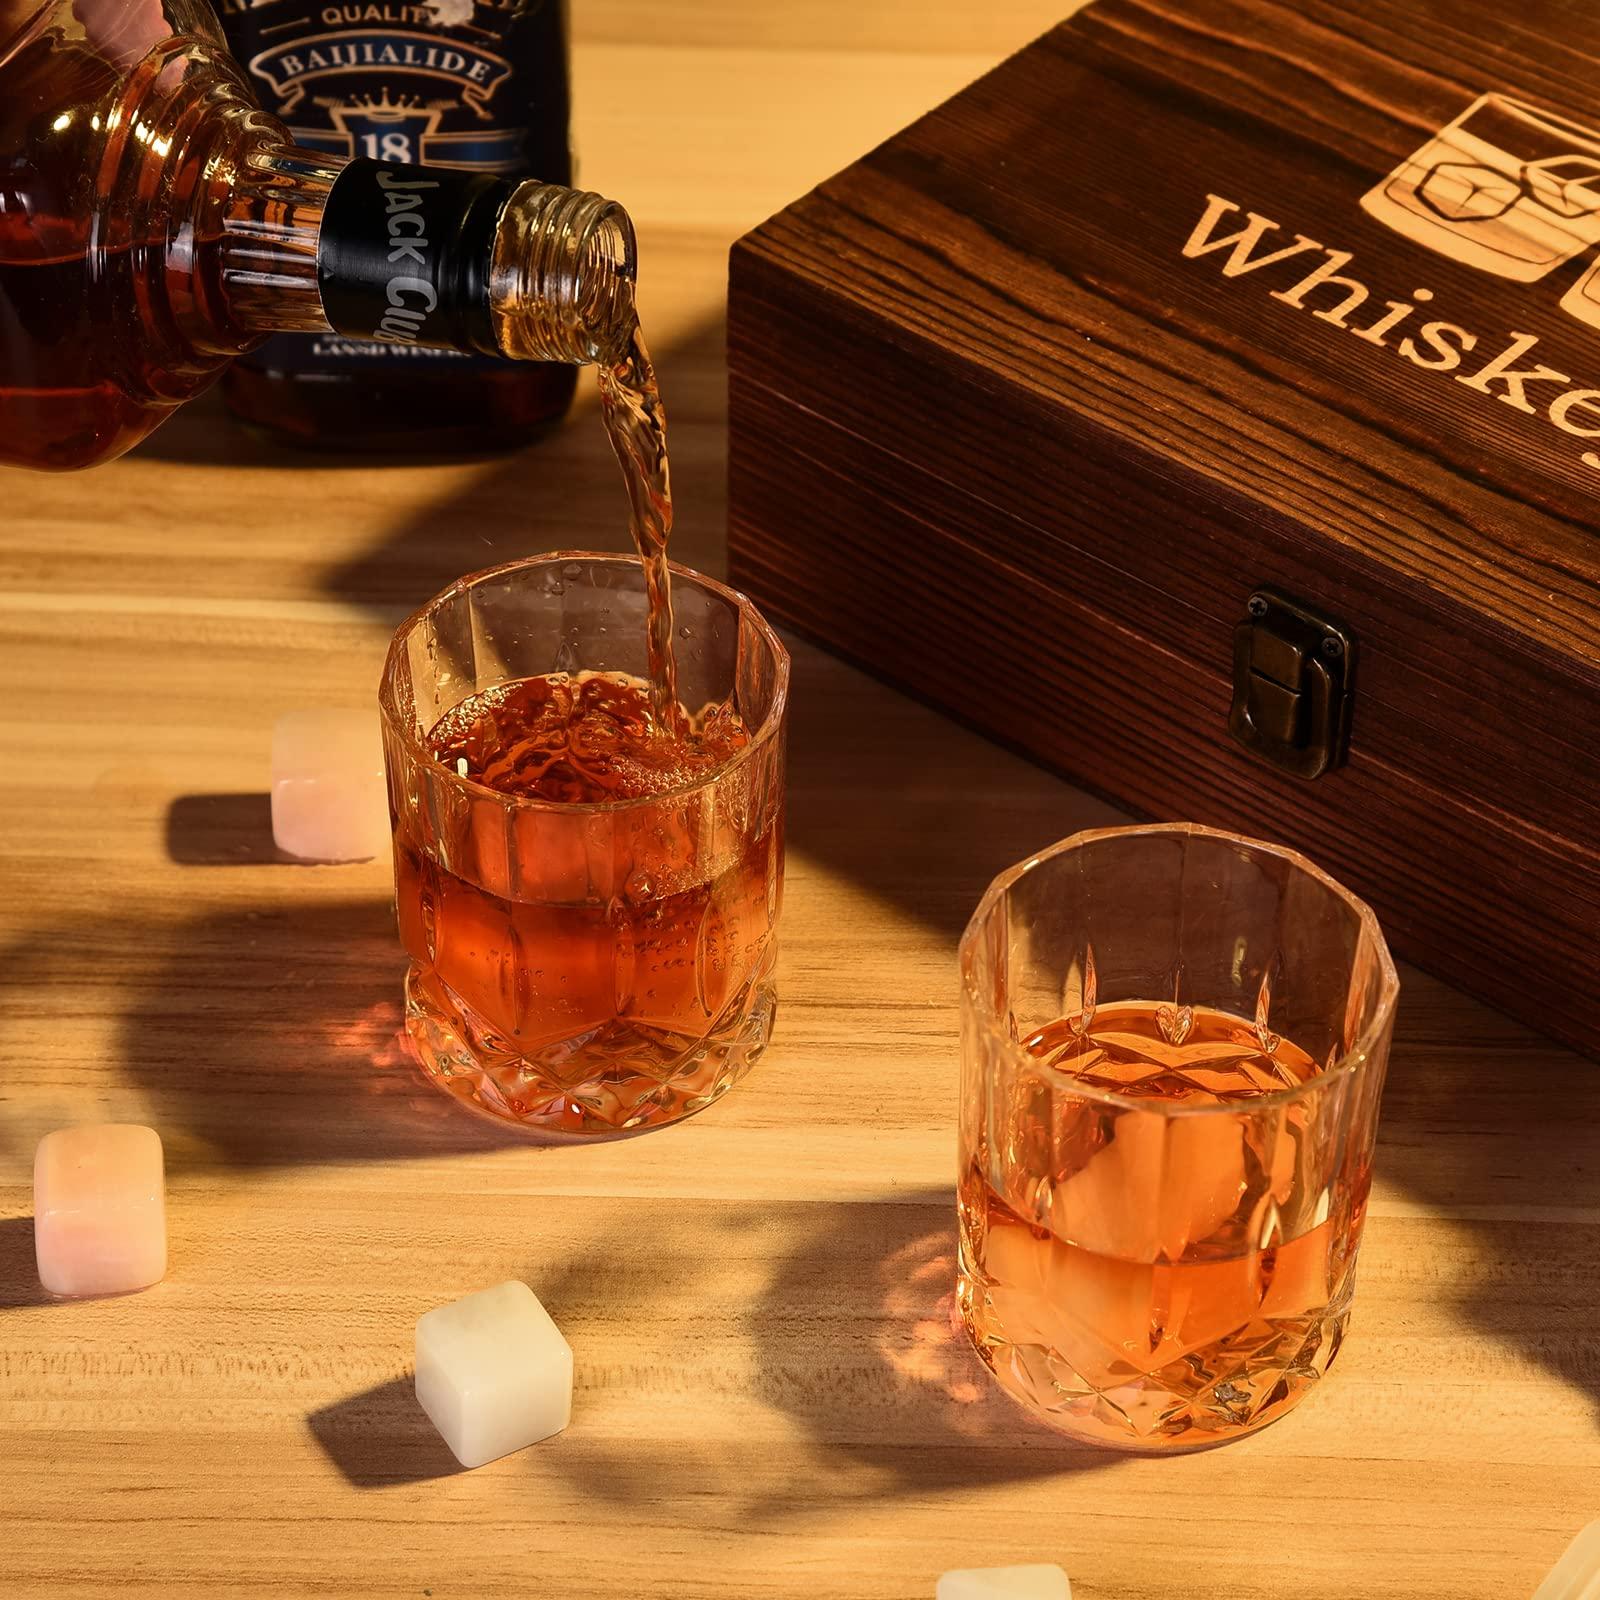 EooCoo 8pcs Marble Whisky Stones Gift Set for Men, Premium Wooden Box with Glasses,Two-Color Design Suitable for Couples/Friends, Easy Storage, for Anniversary Birthday Wedding Housewarming 4